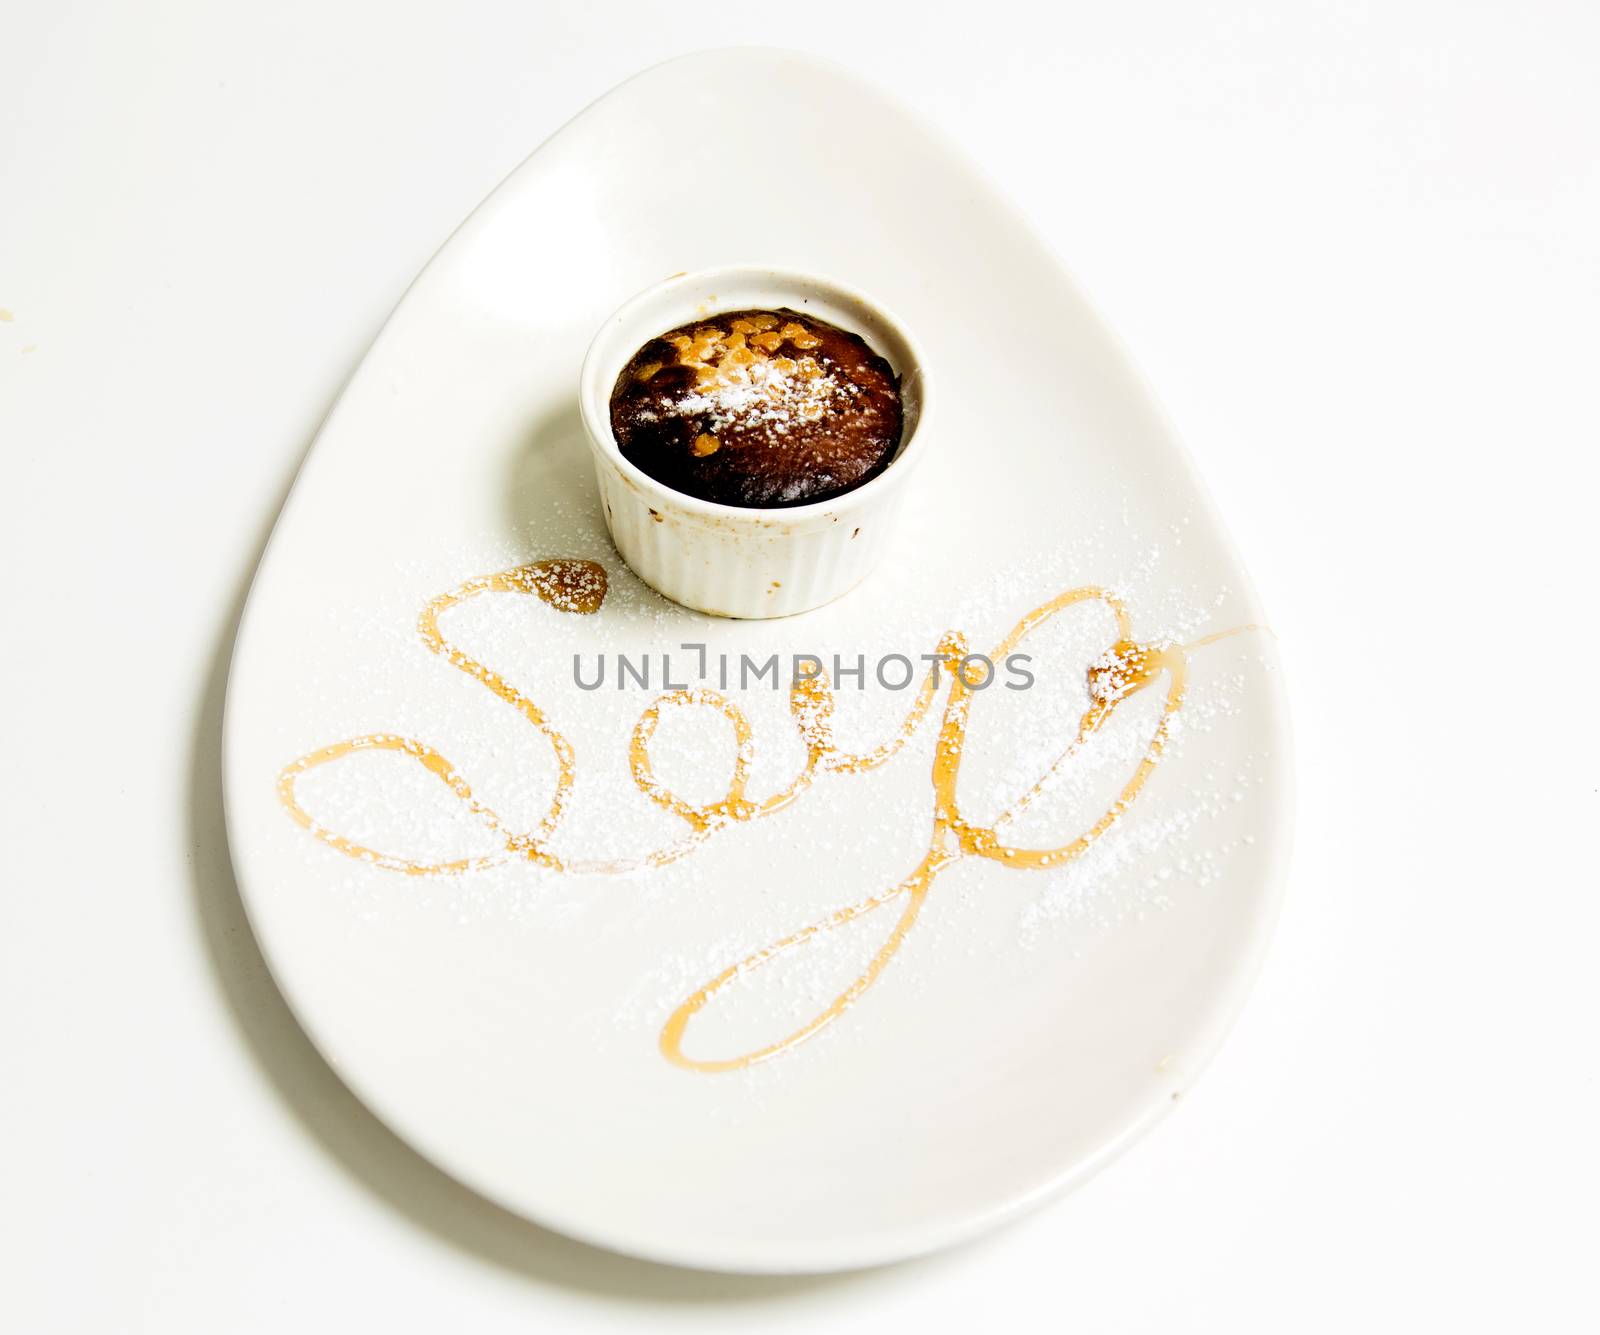 Soya Sauce in a cup placed over an oval plate